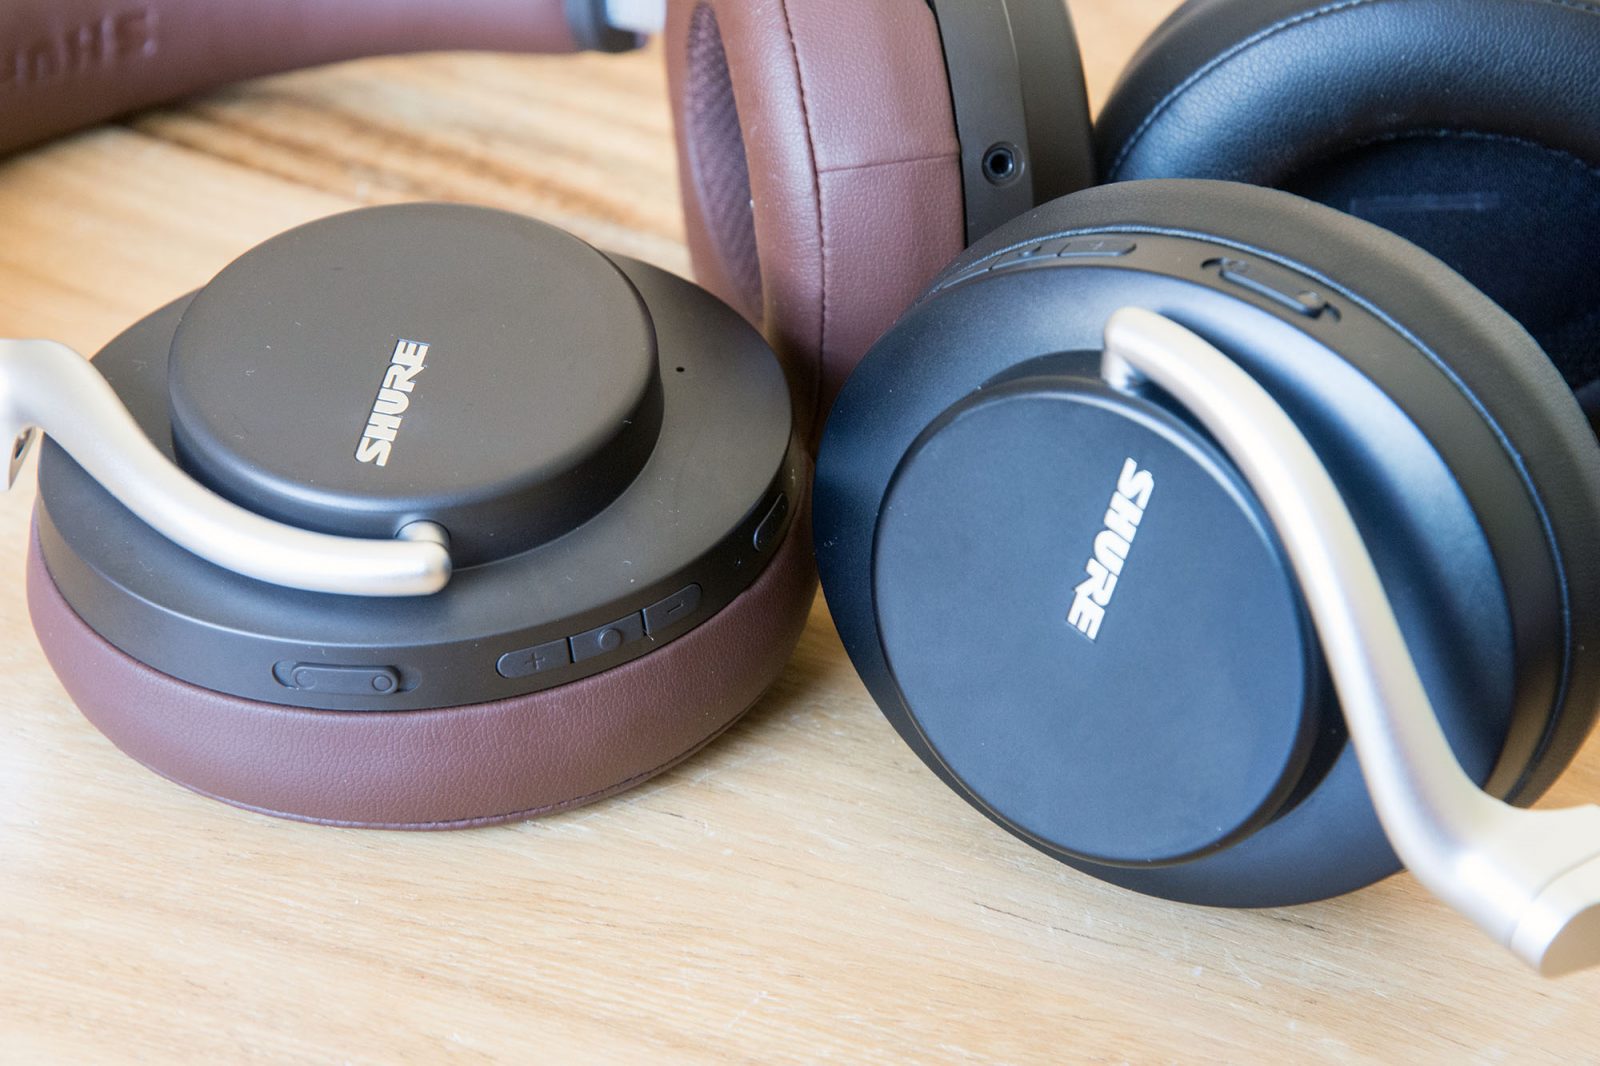 Shure AONIC 50 headphone review: Phenomenal sound without major